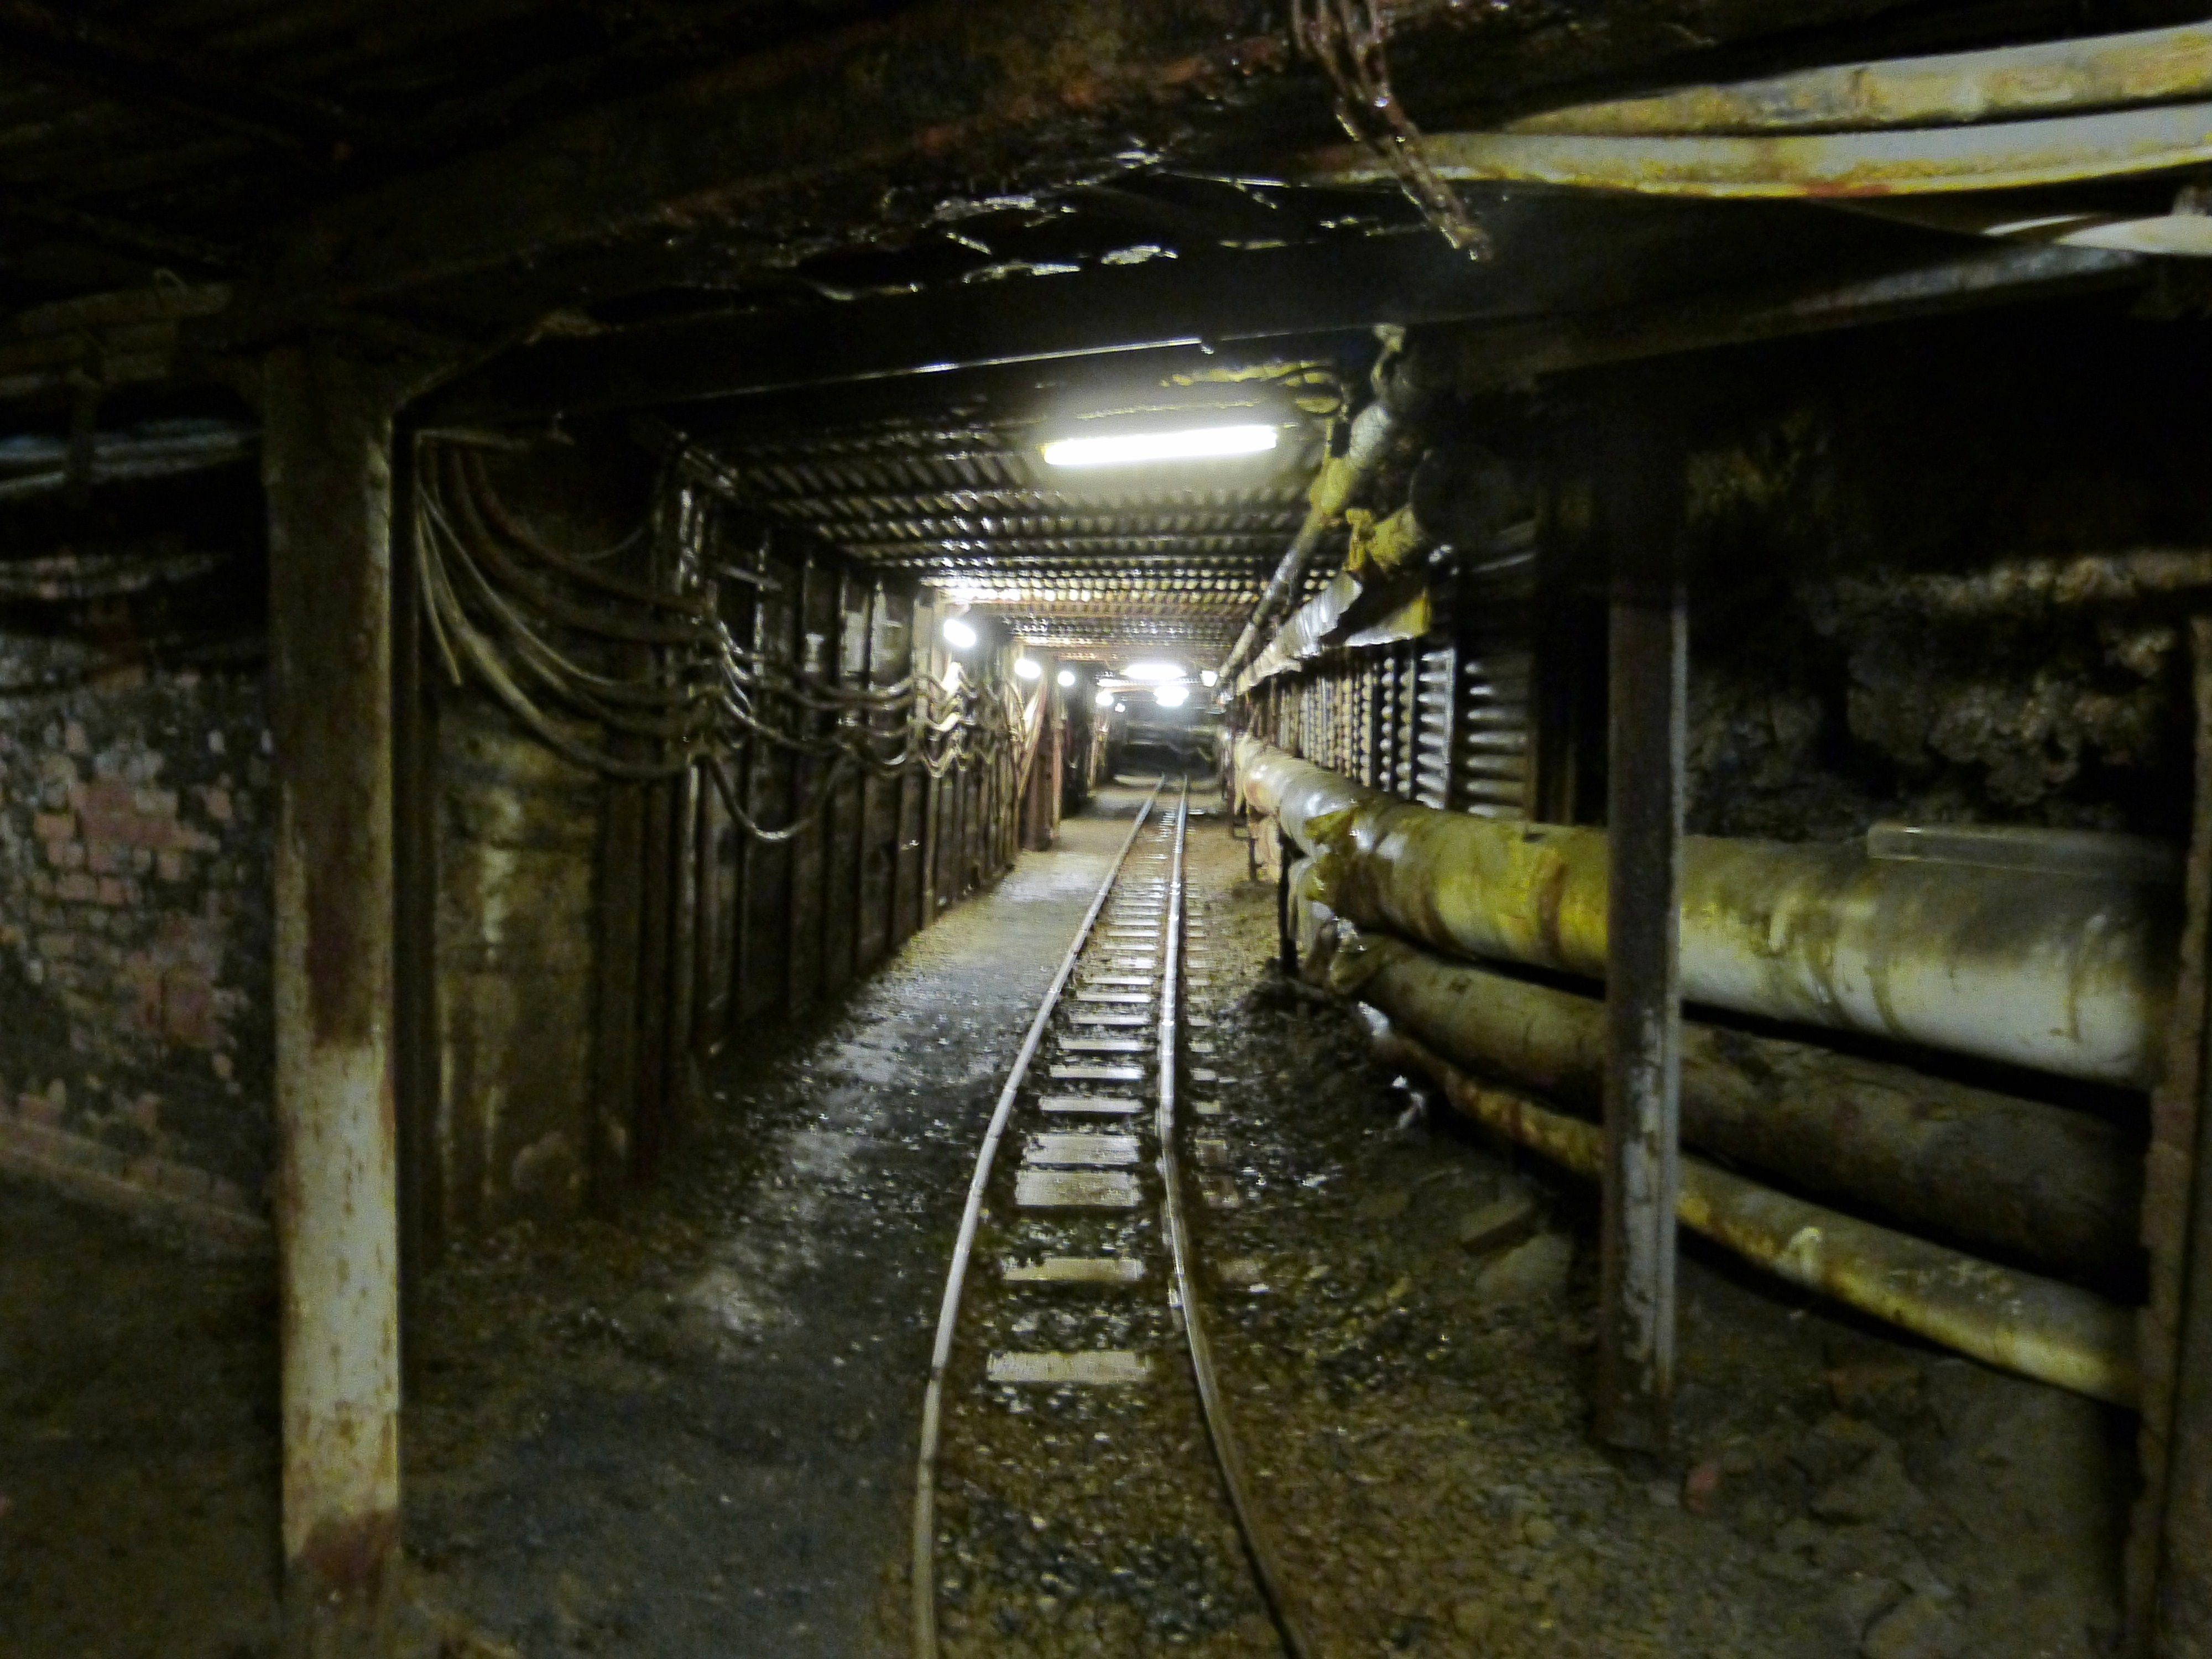 Into the Rammelsberg mine - a UNESCO world heritage site